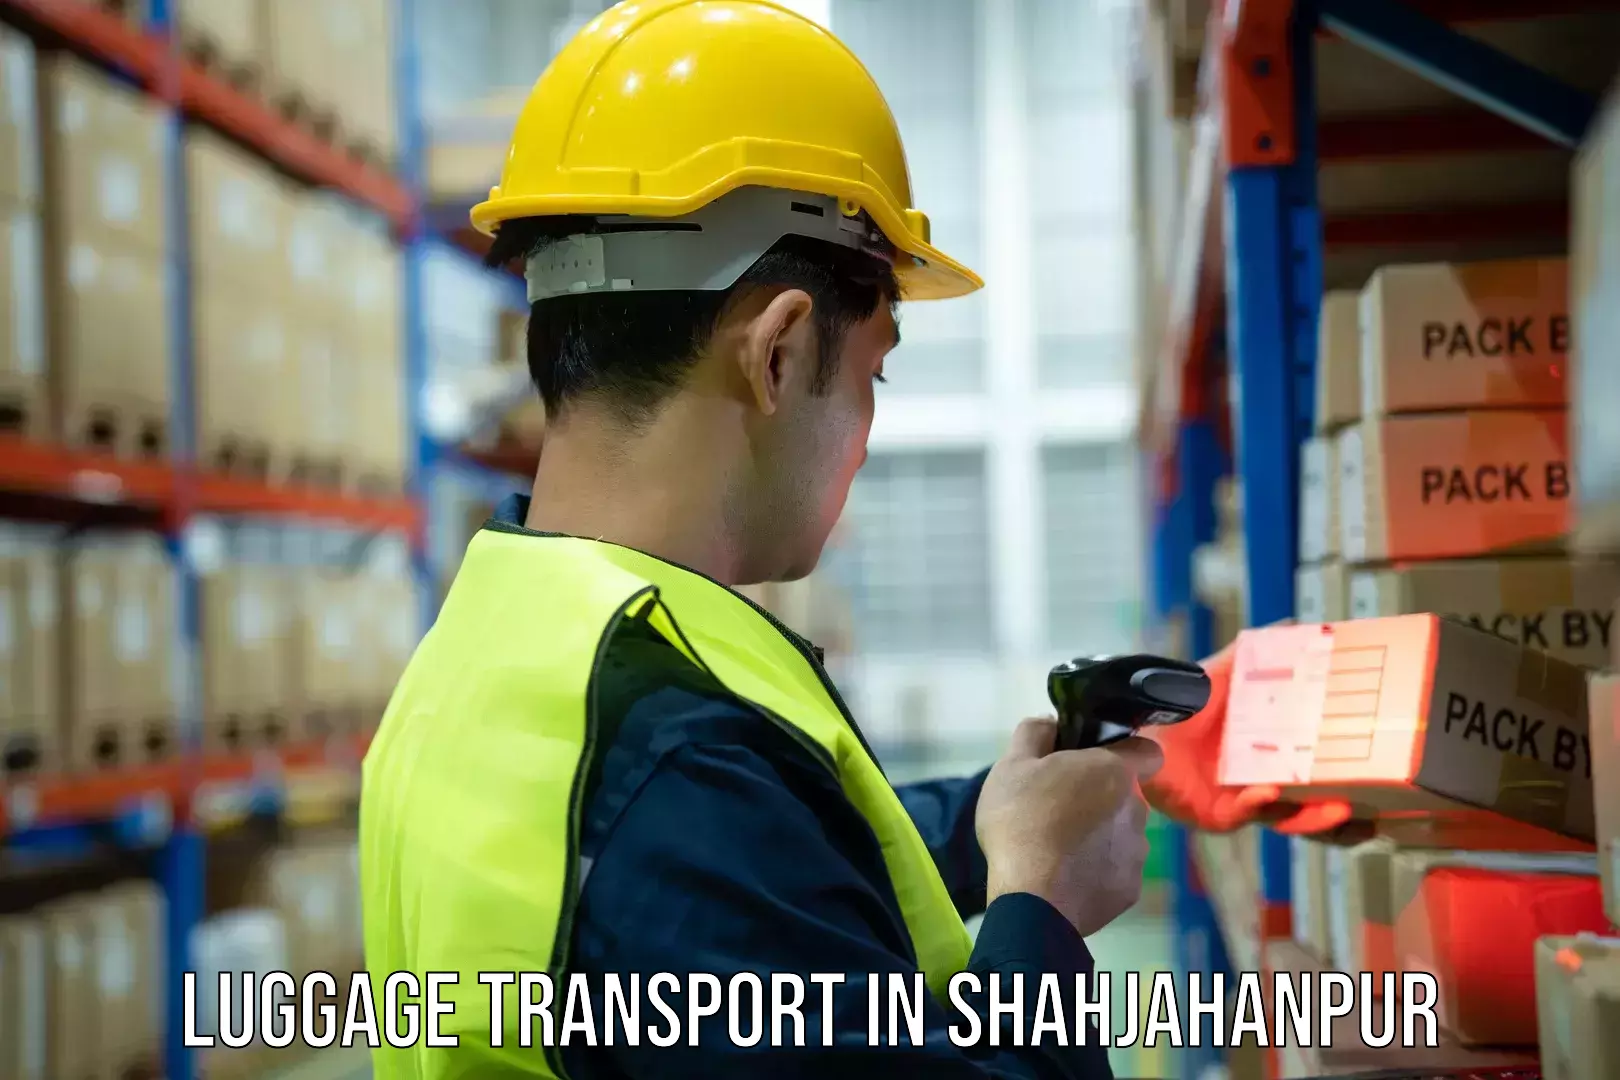 Luggage shipment processing in Shahjahanpur